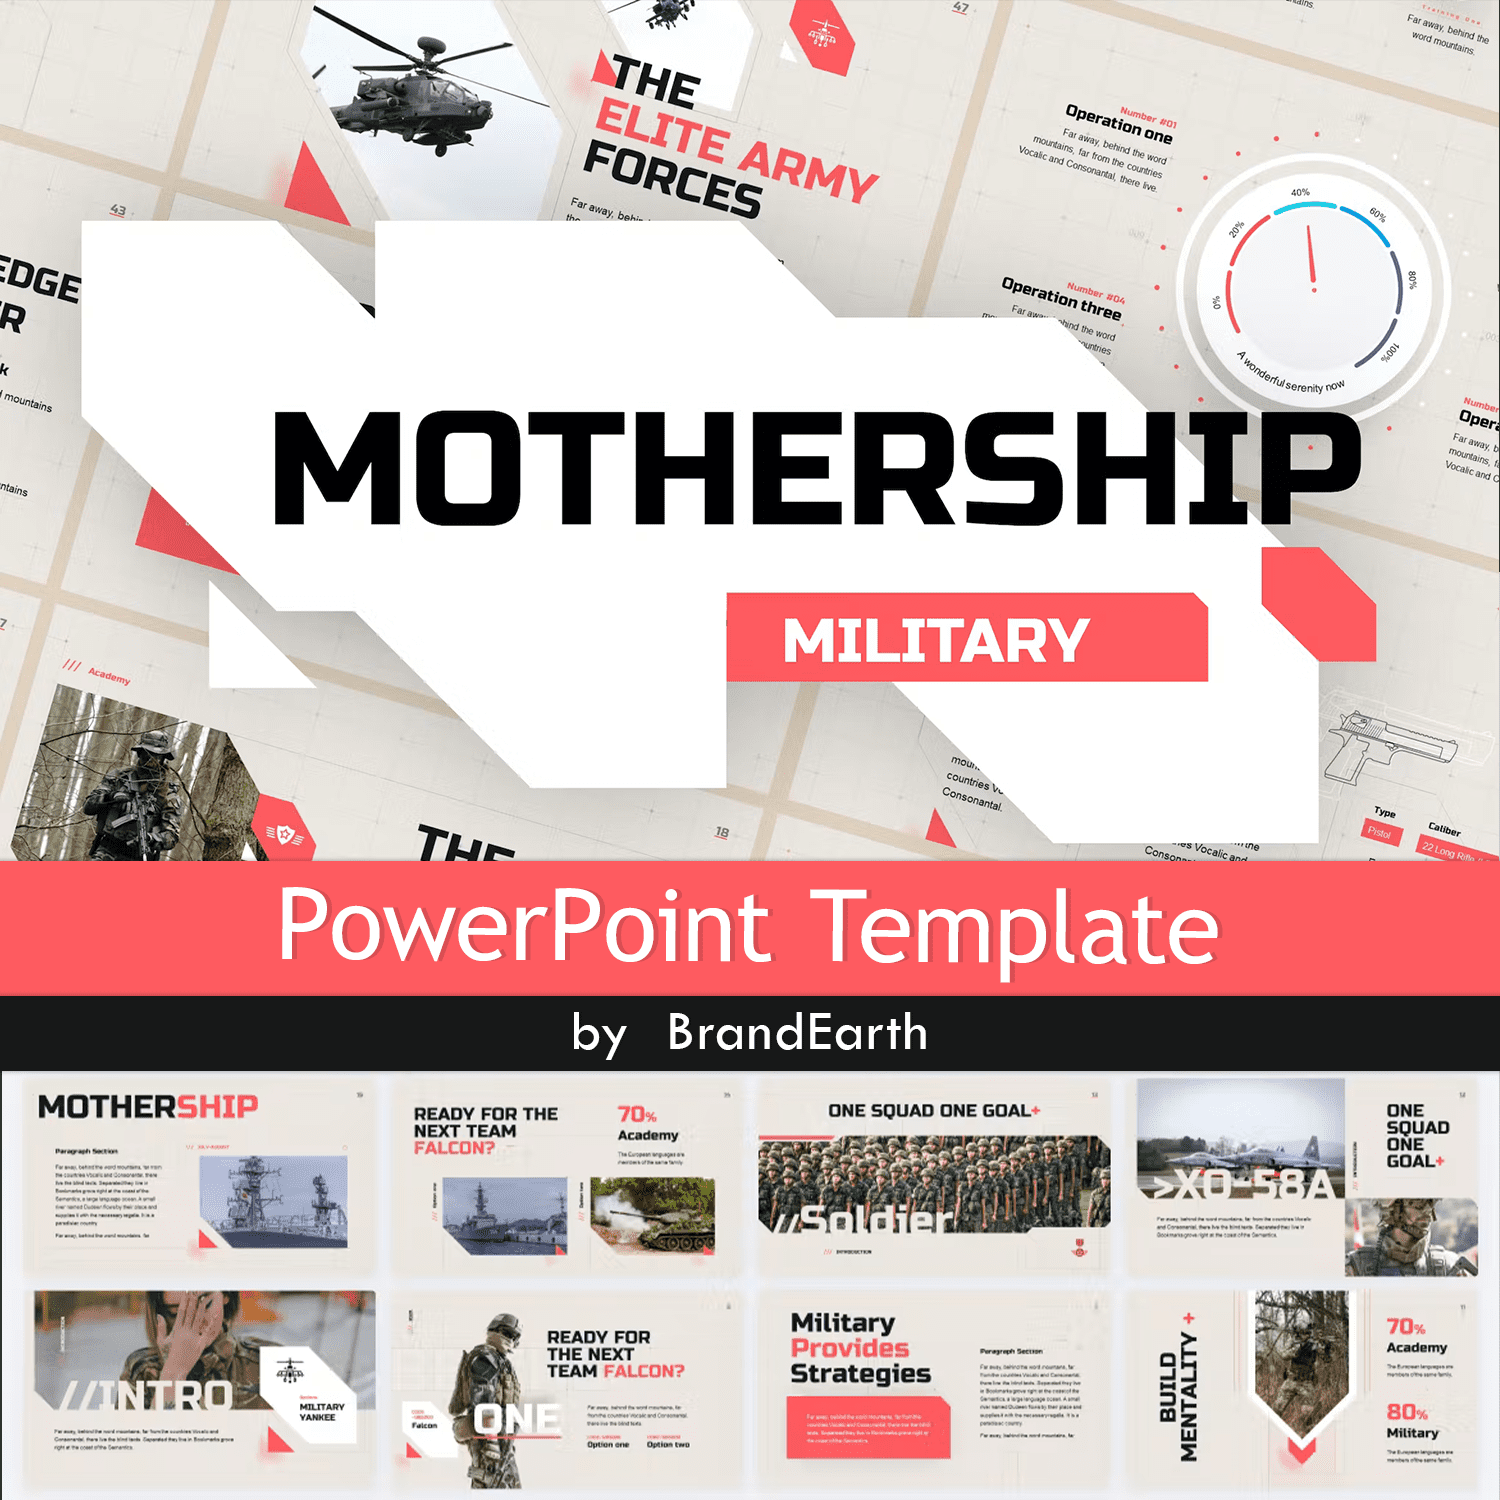 Mothership Military PowerPoint Template.